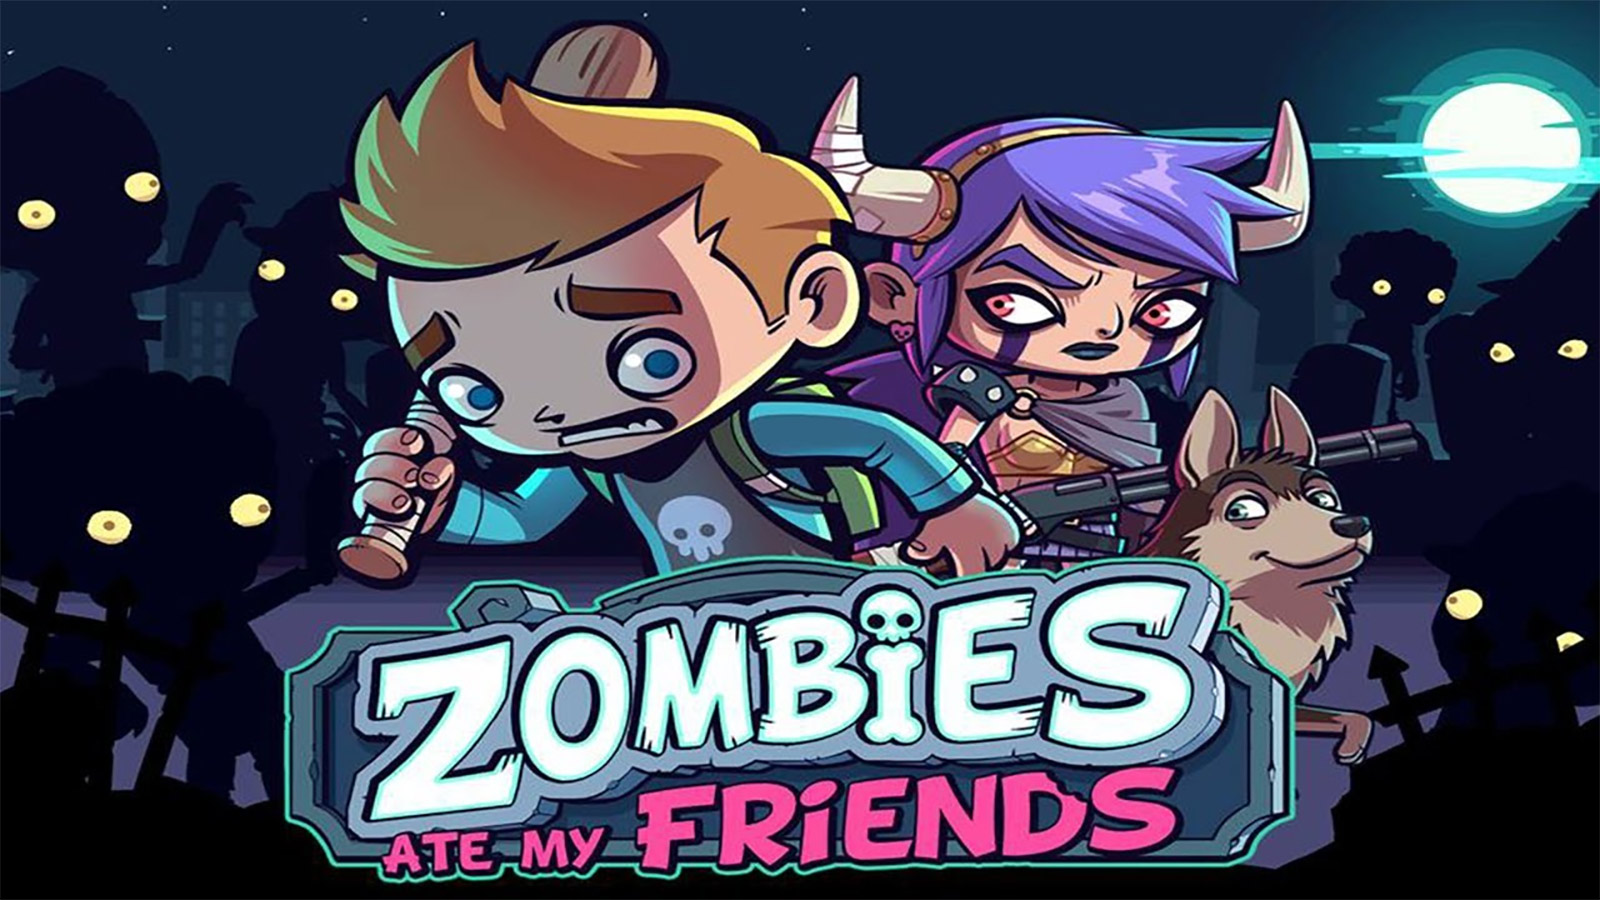 Zombies Ate My Friends Mod Apk 2.1.1 (Unlimited Gold)